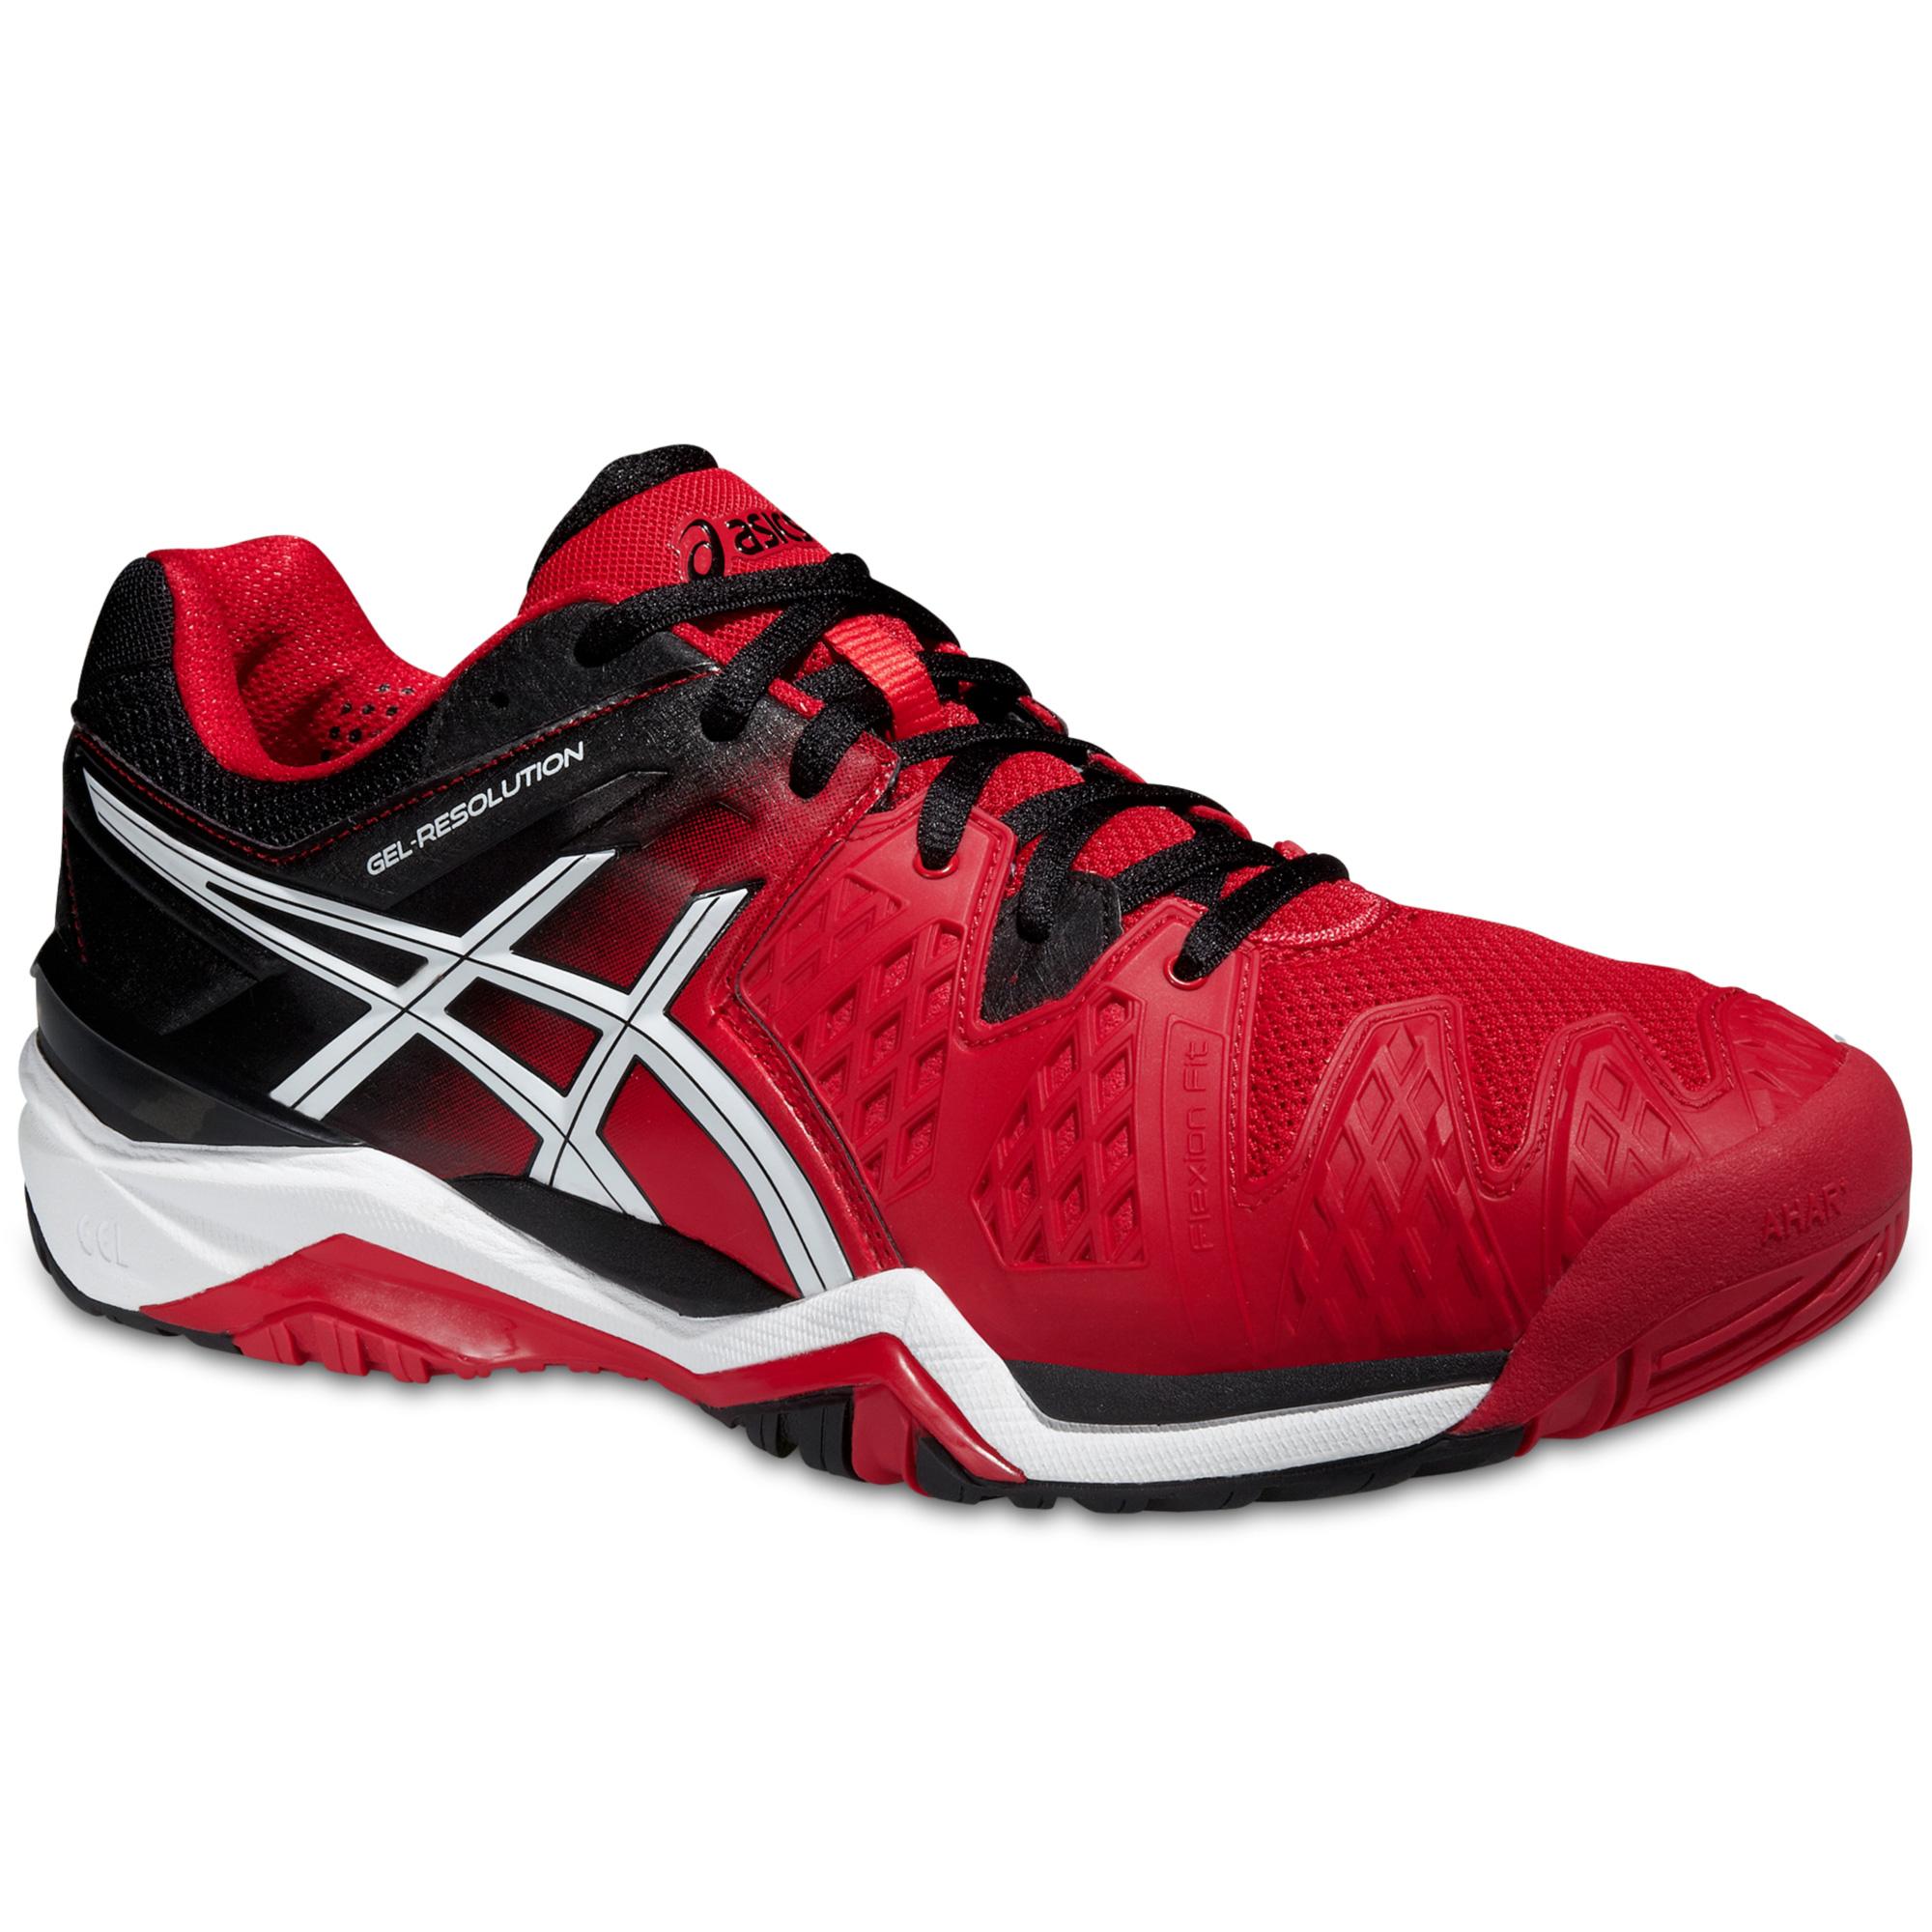 Asics Mens GEL-Resolution 6 Tennis Shoes - Fiery Red ...